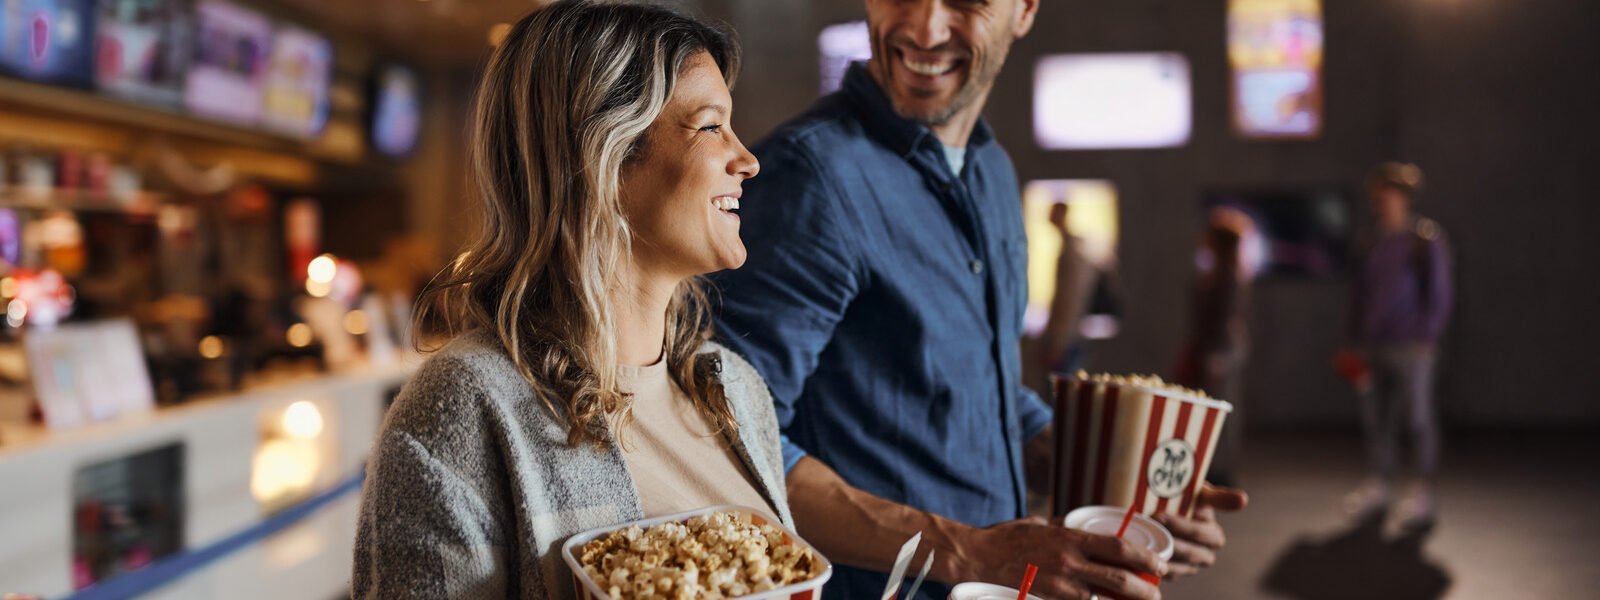 The Scientific Reason Movie Theater Food Cravings Are Hard To Control - Health Digest